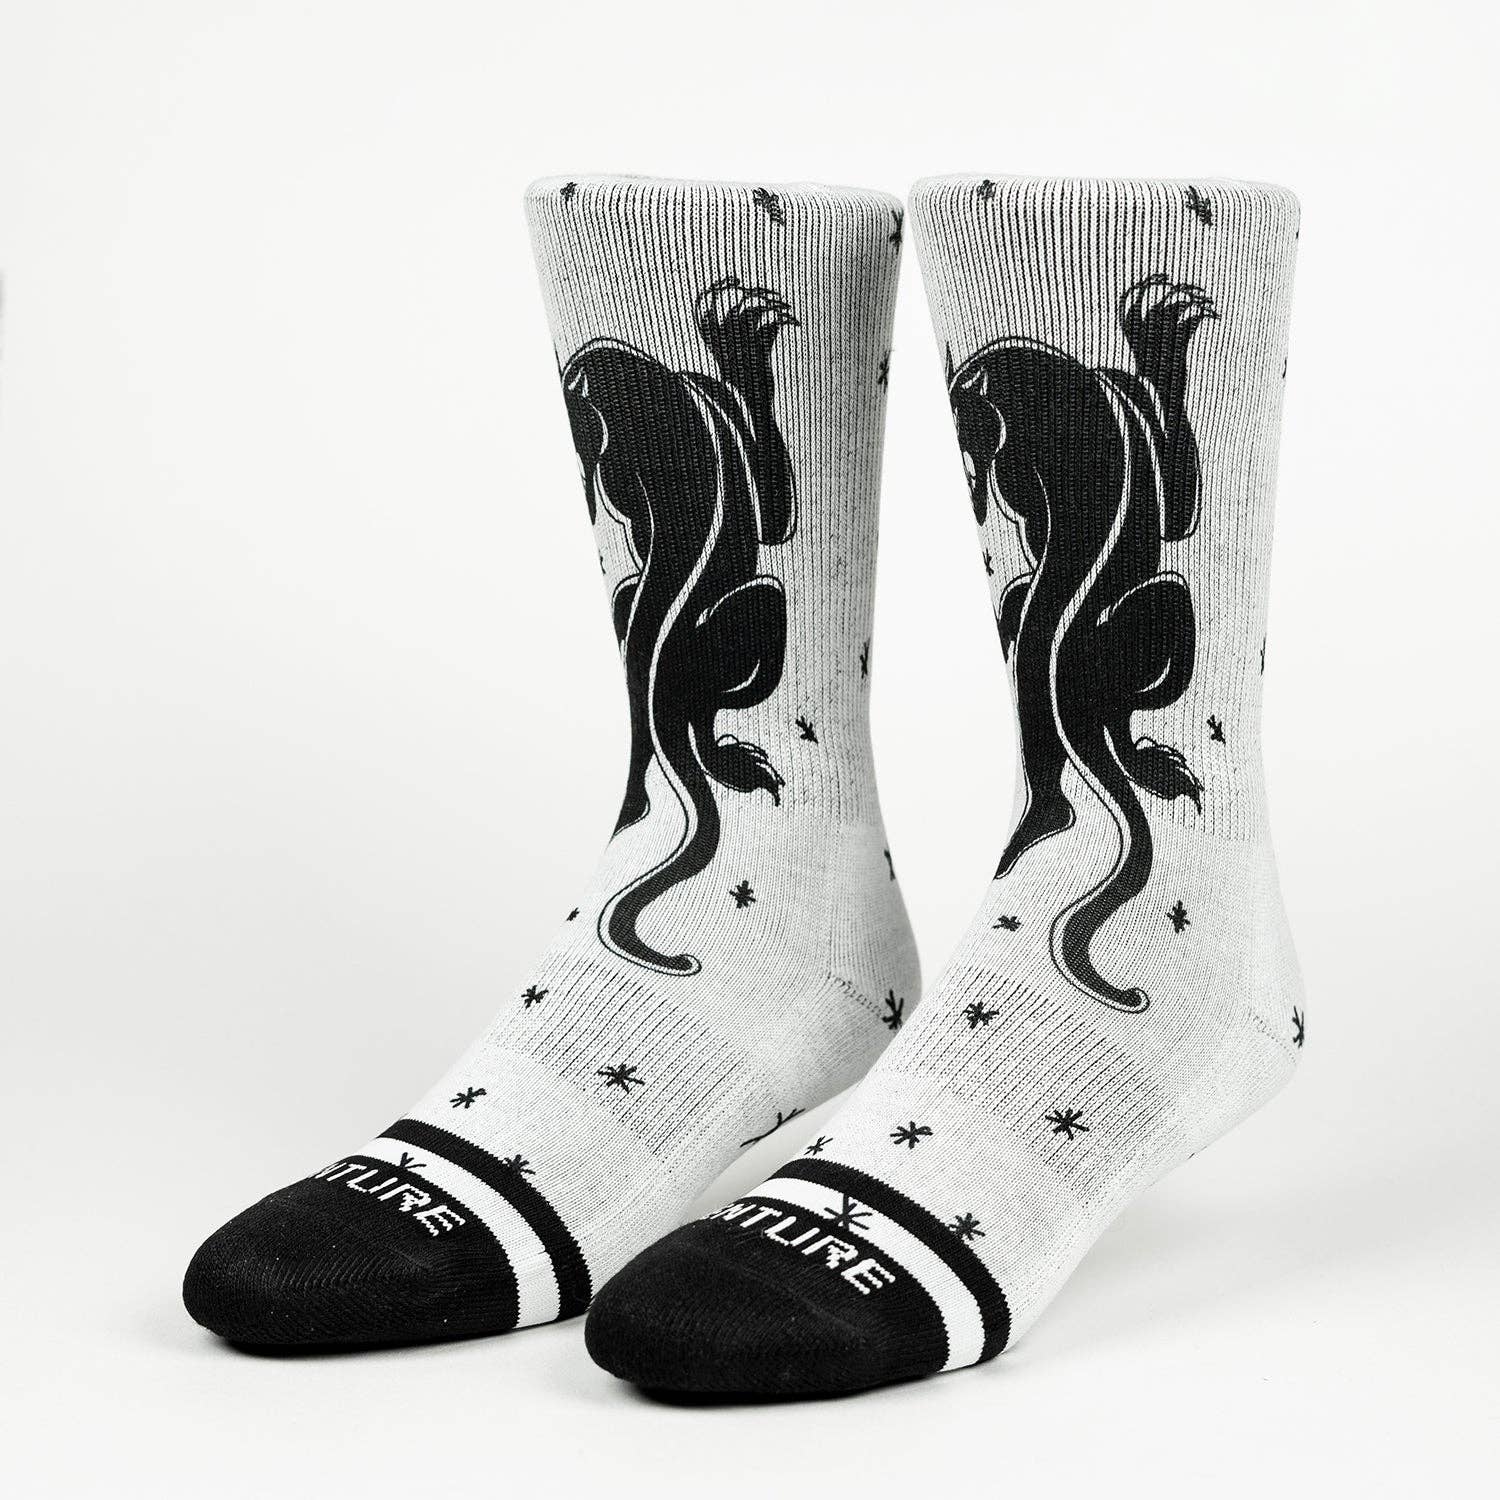 CHAUSSONS CHAUSSETTES Stance TOASTED noir – Stance Europe